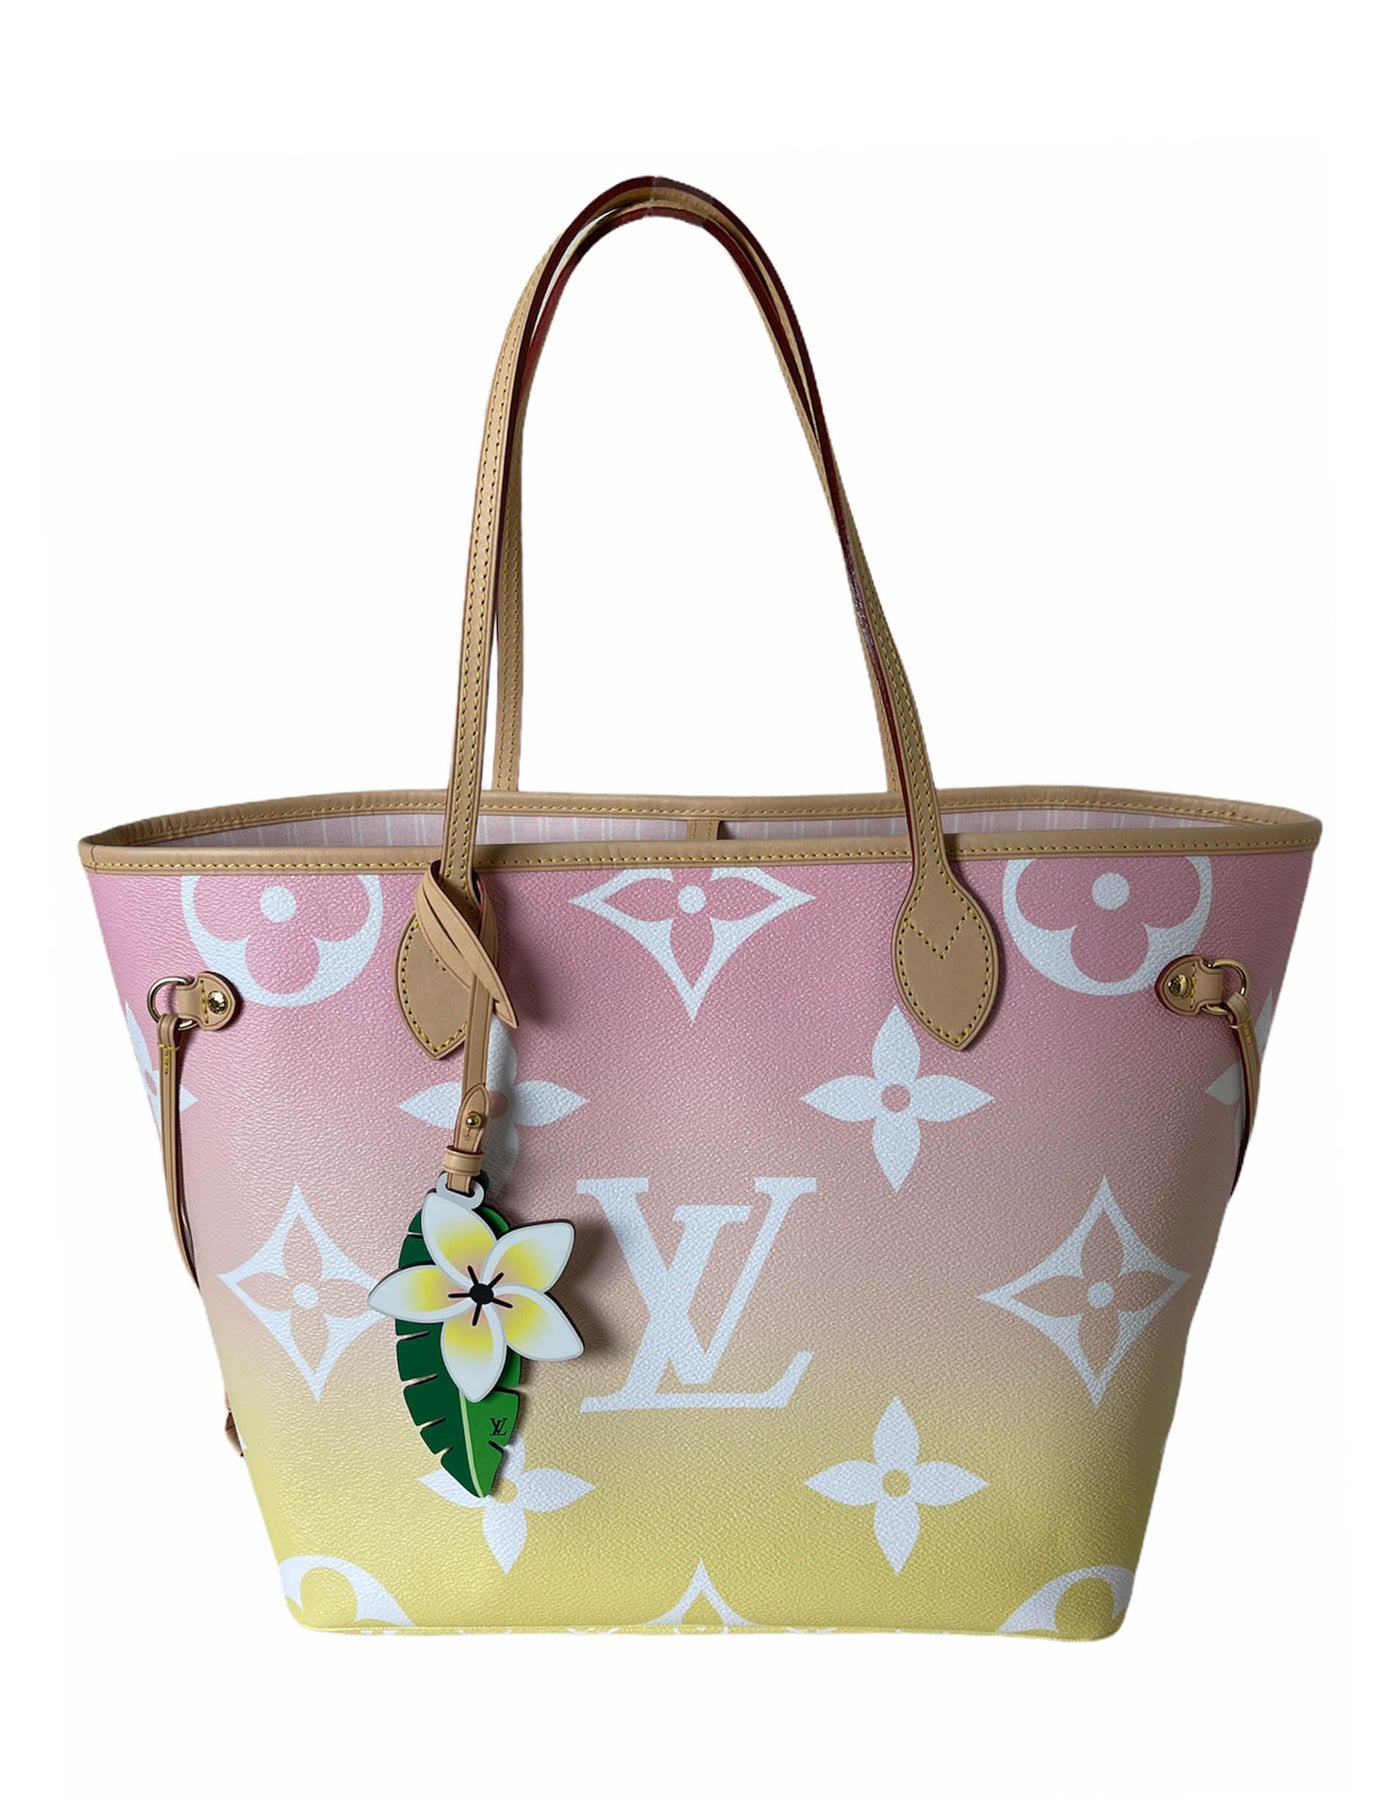 LOUIS VUITTON BY THE POOL NEVERFULL MM BRUME GIANT FLOWER MONOGRAM